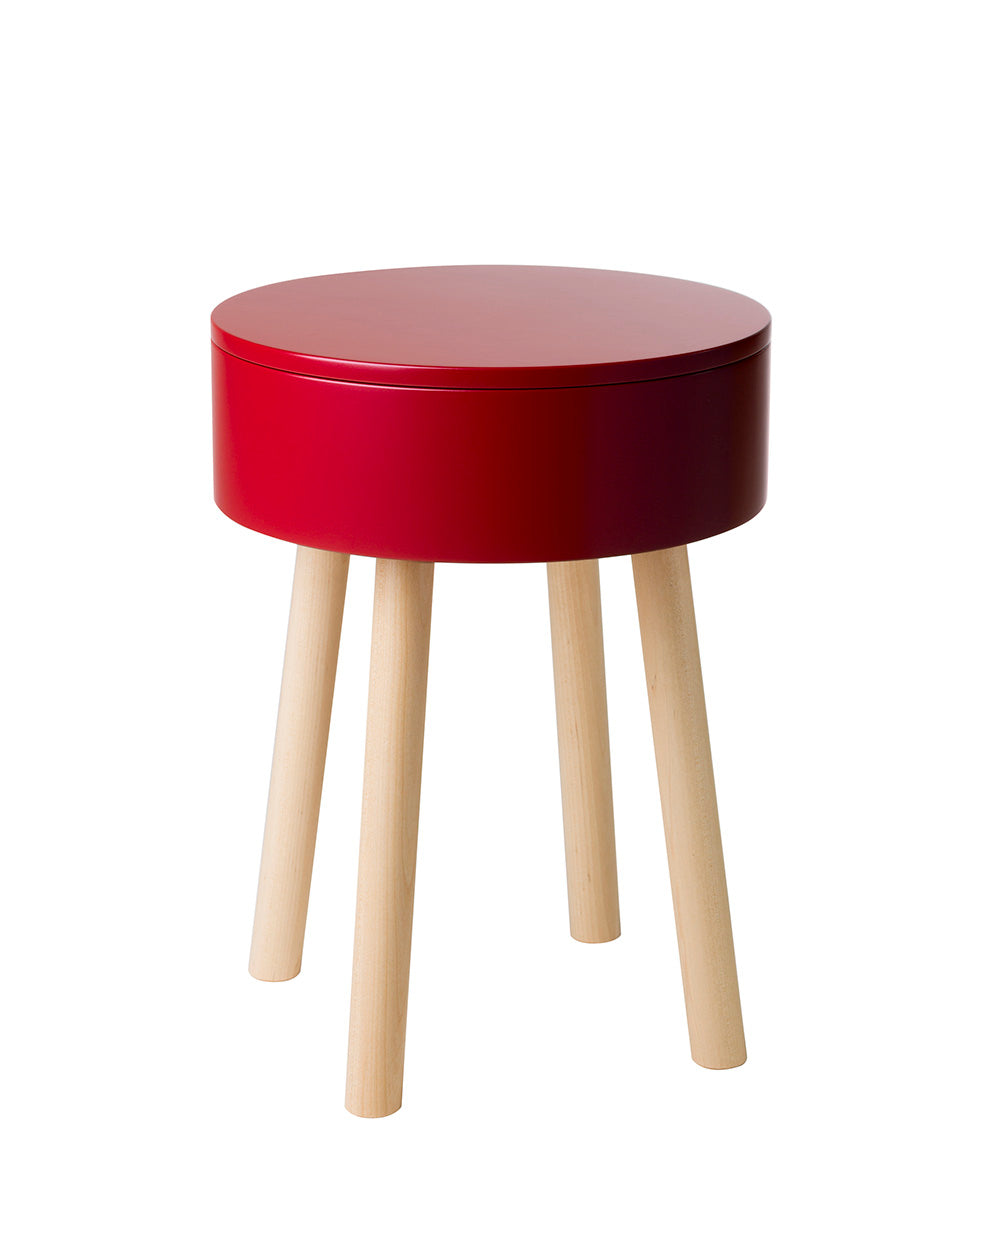 Multifunctional Piilo stool in Pomegranate Red. Piilo is a stool with storage space hidden inside its seat. Designed by Hanna Lantto. Made in Finland.